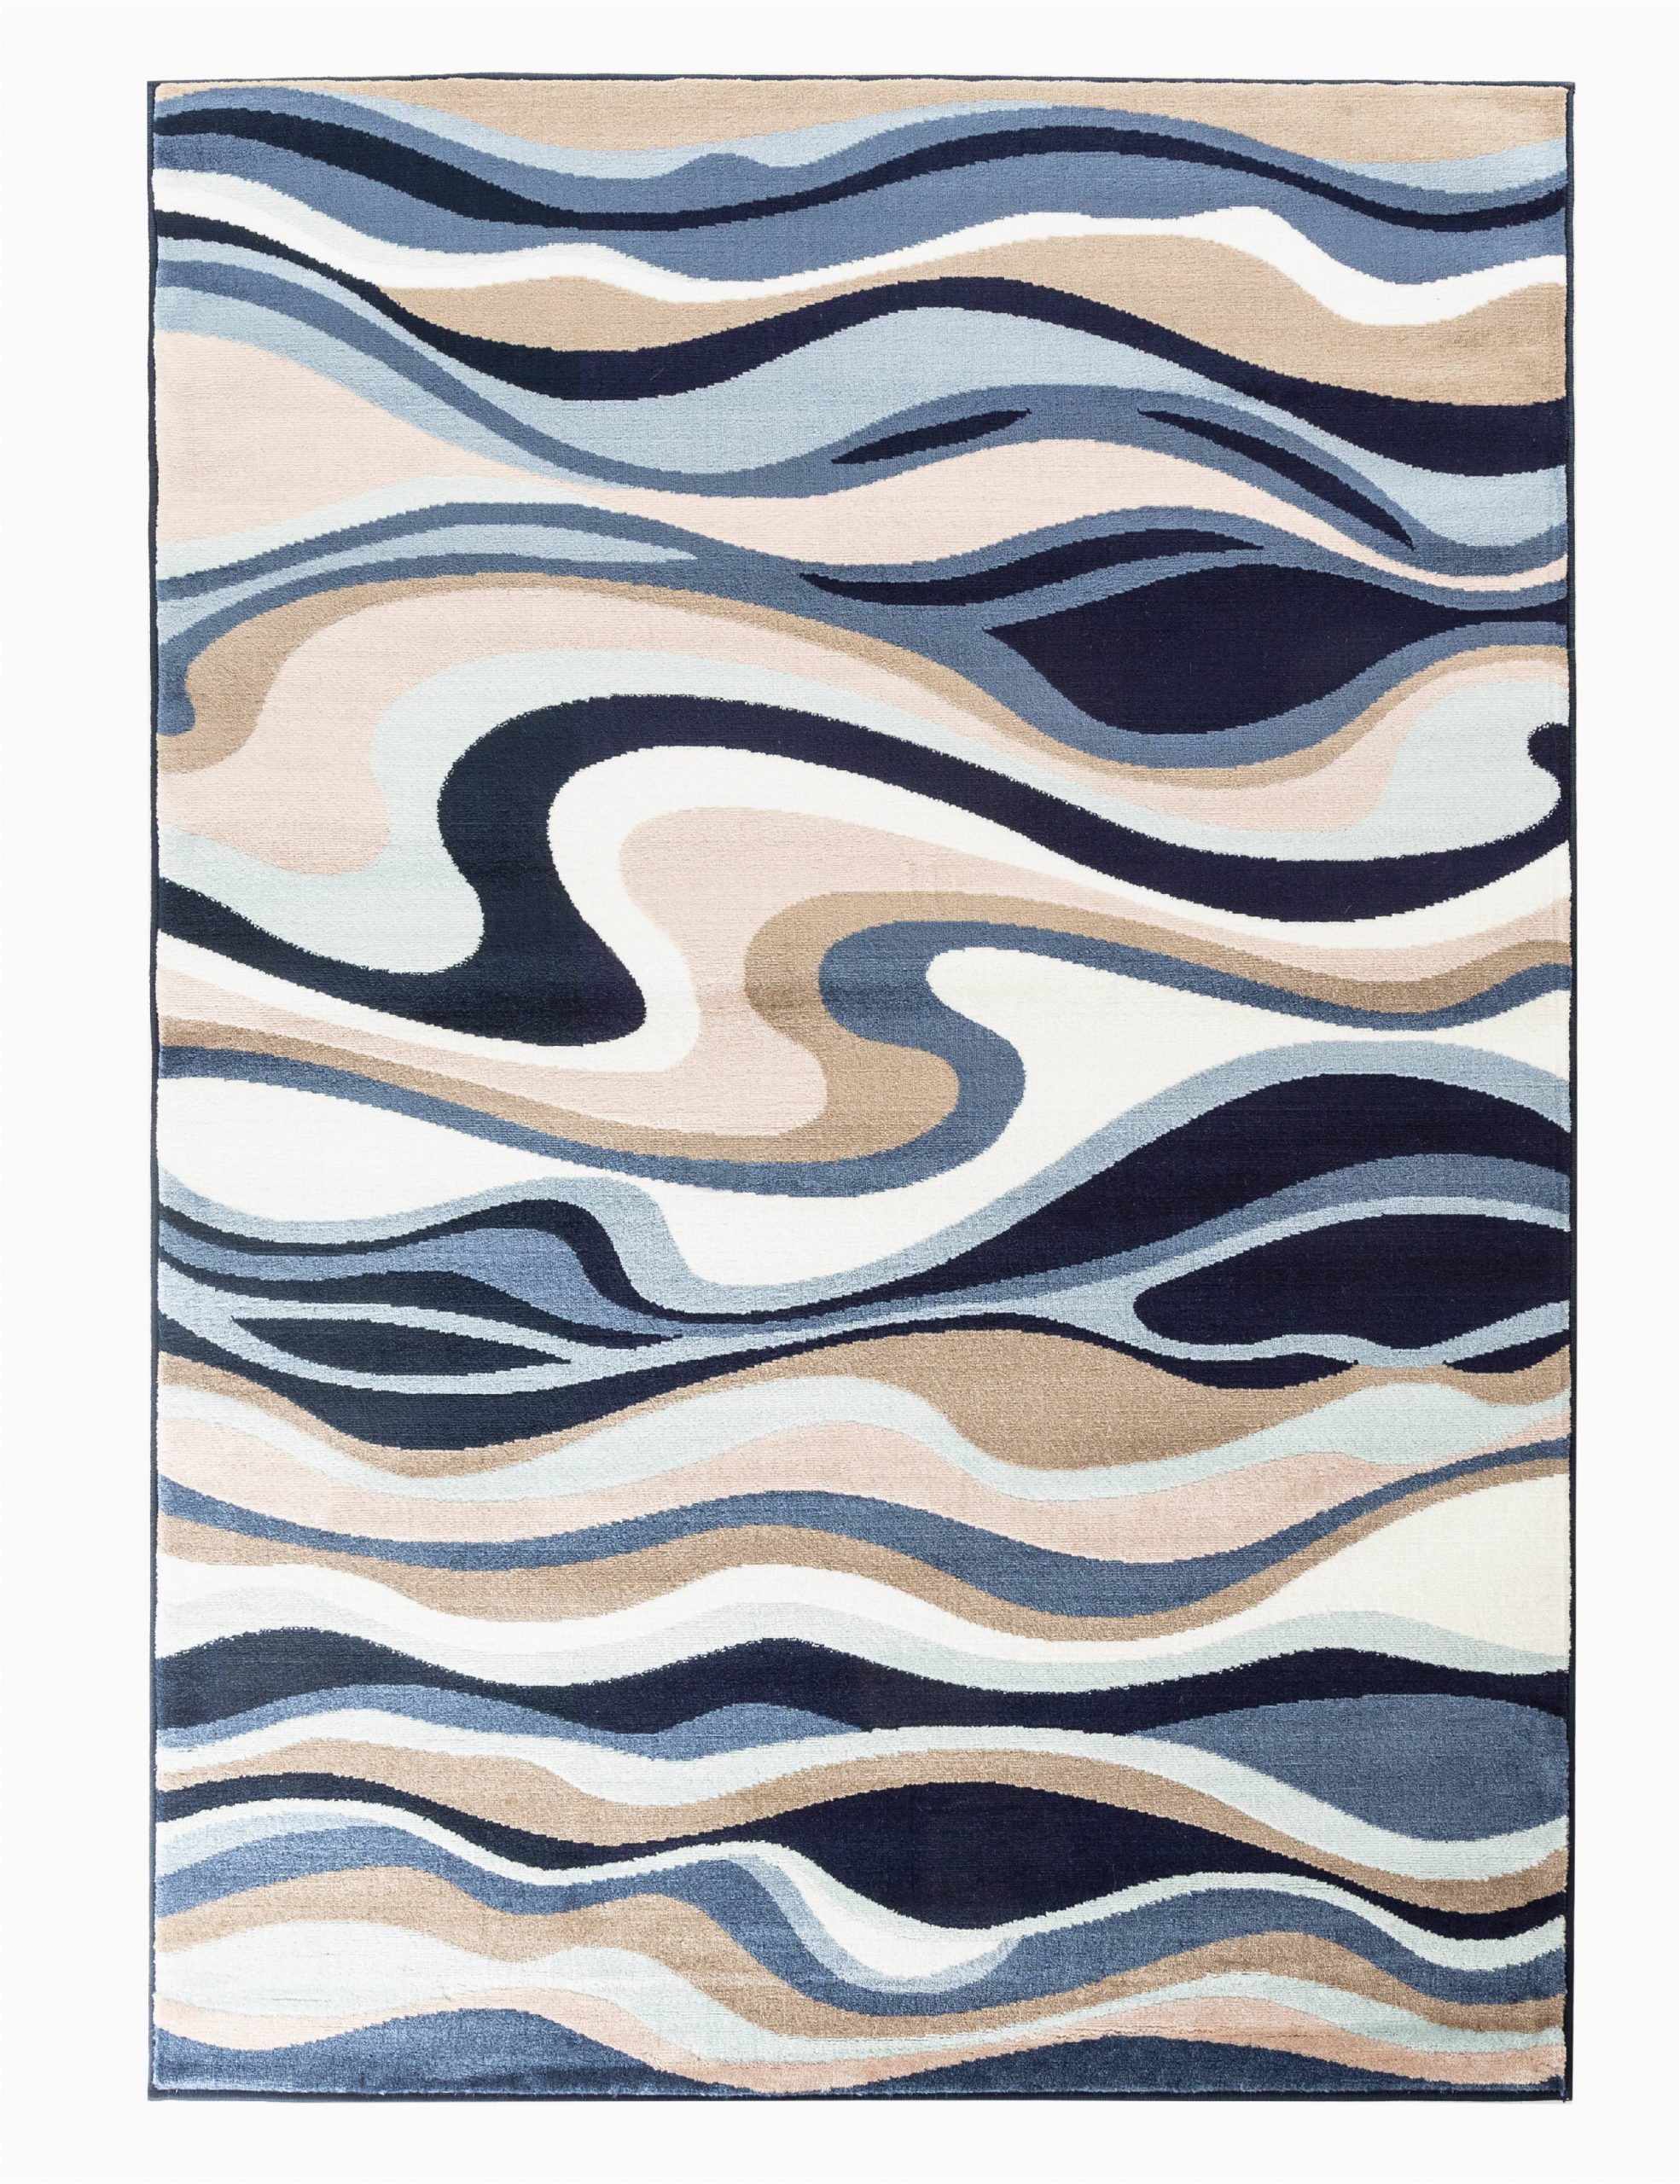 Better Homes and Gardens area Rug Waves Romance Collection Rugs Blue White Brown Absreact Wave Design Premium soft area Rug 2 X3 Door Scatter Mat